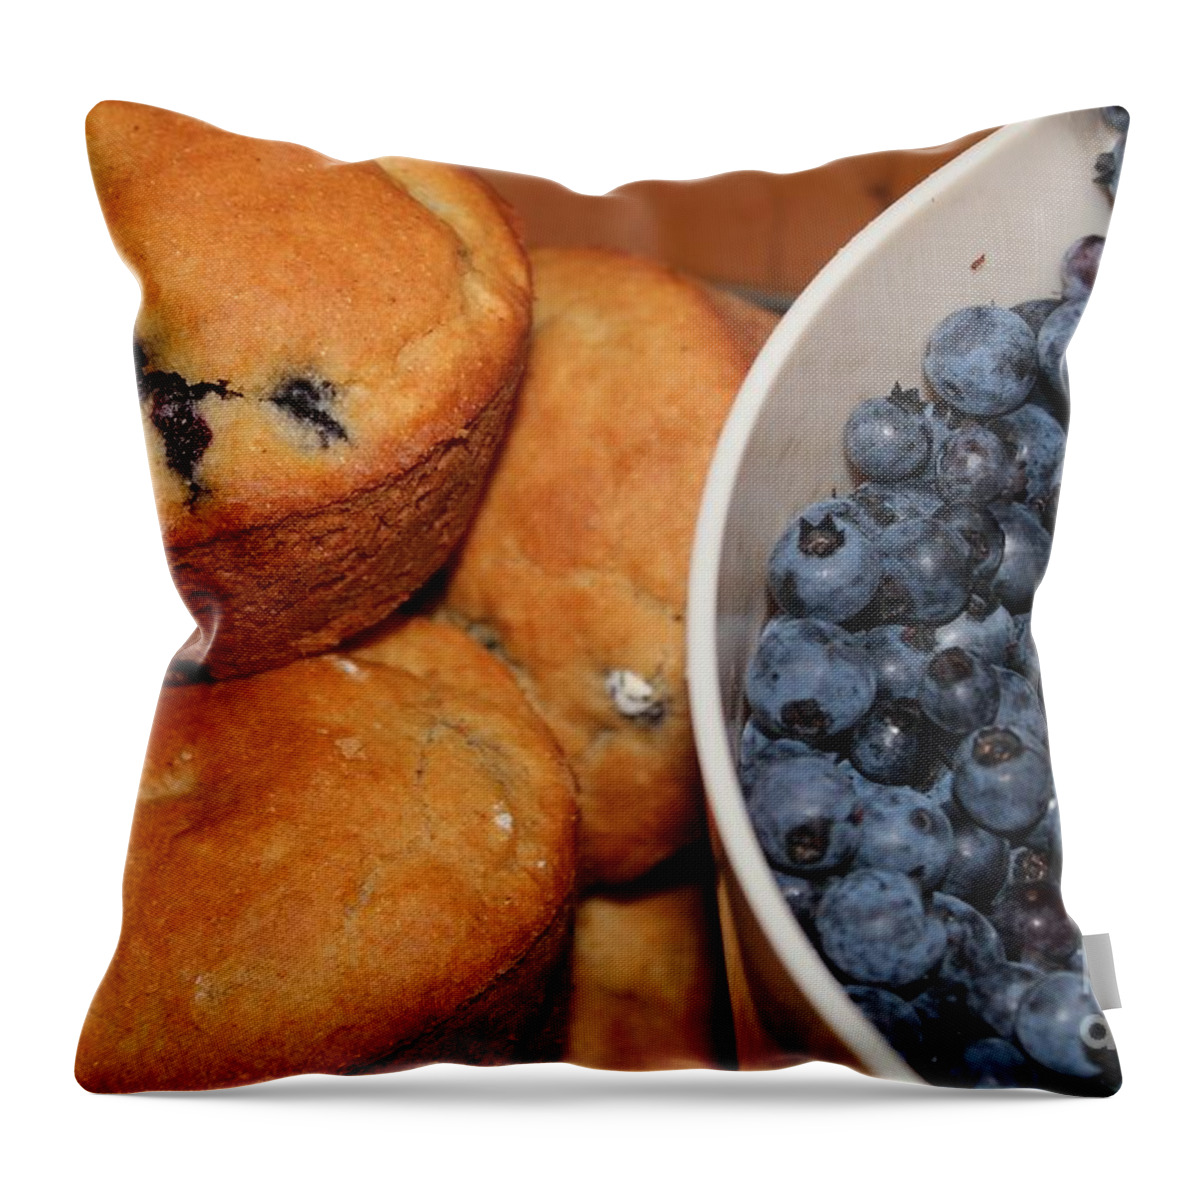 Fresh Blueberries And Muffins Throw Pillow featuring the photograph Fresh Blueberries and Muffins by Barbara A Griffin